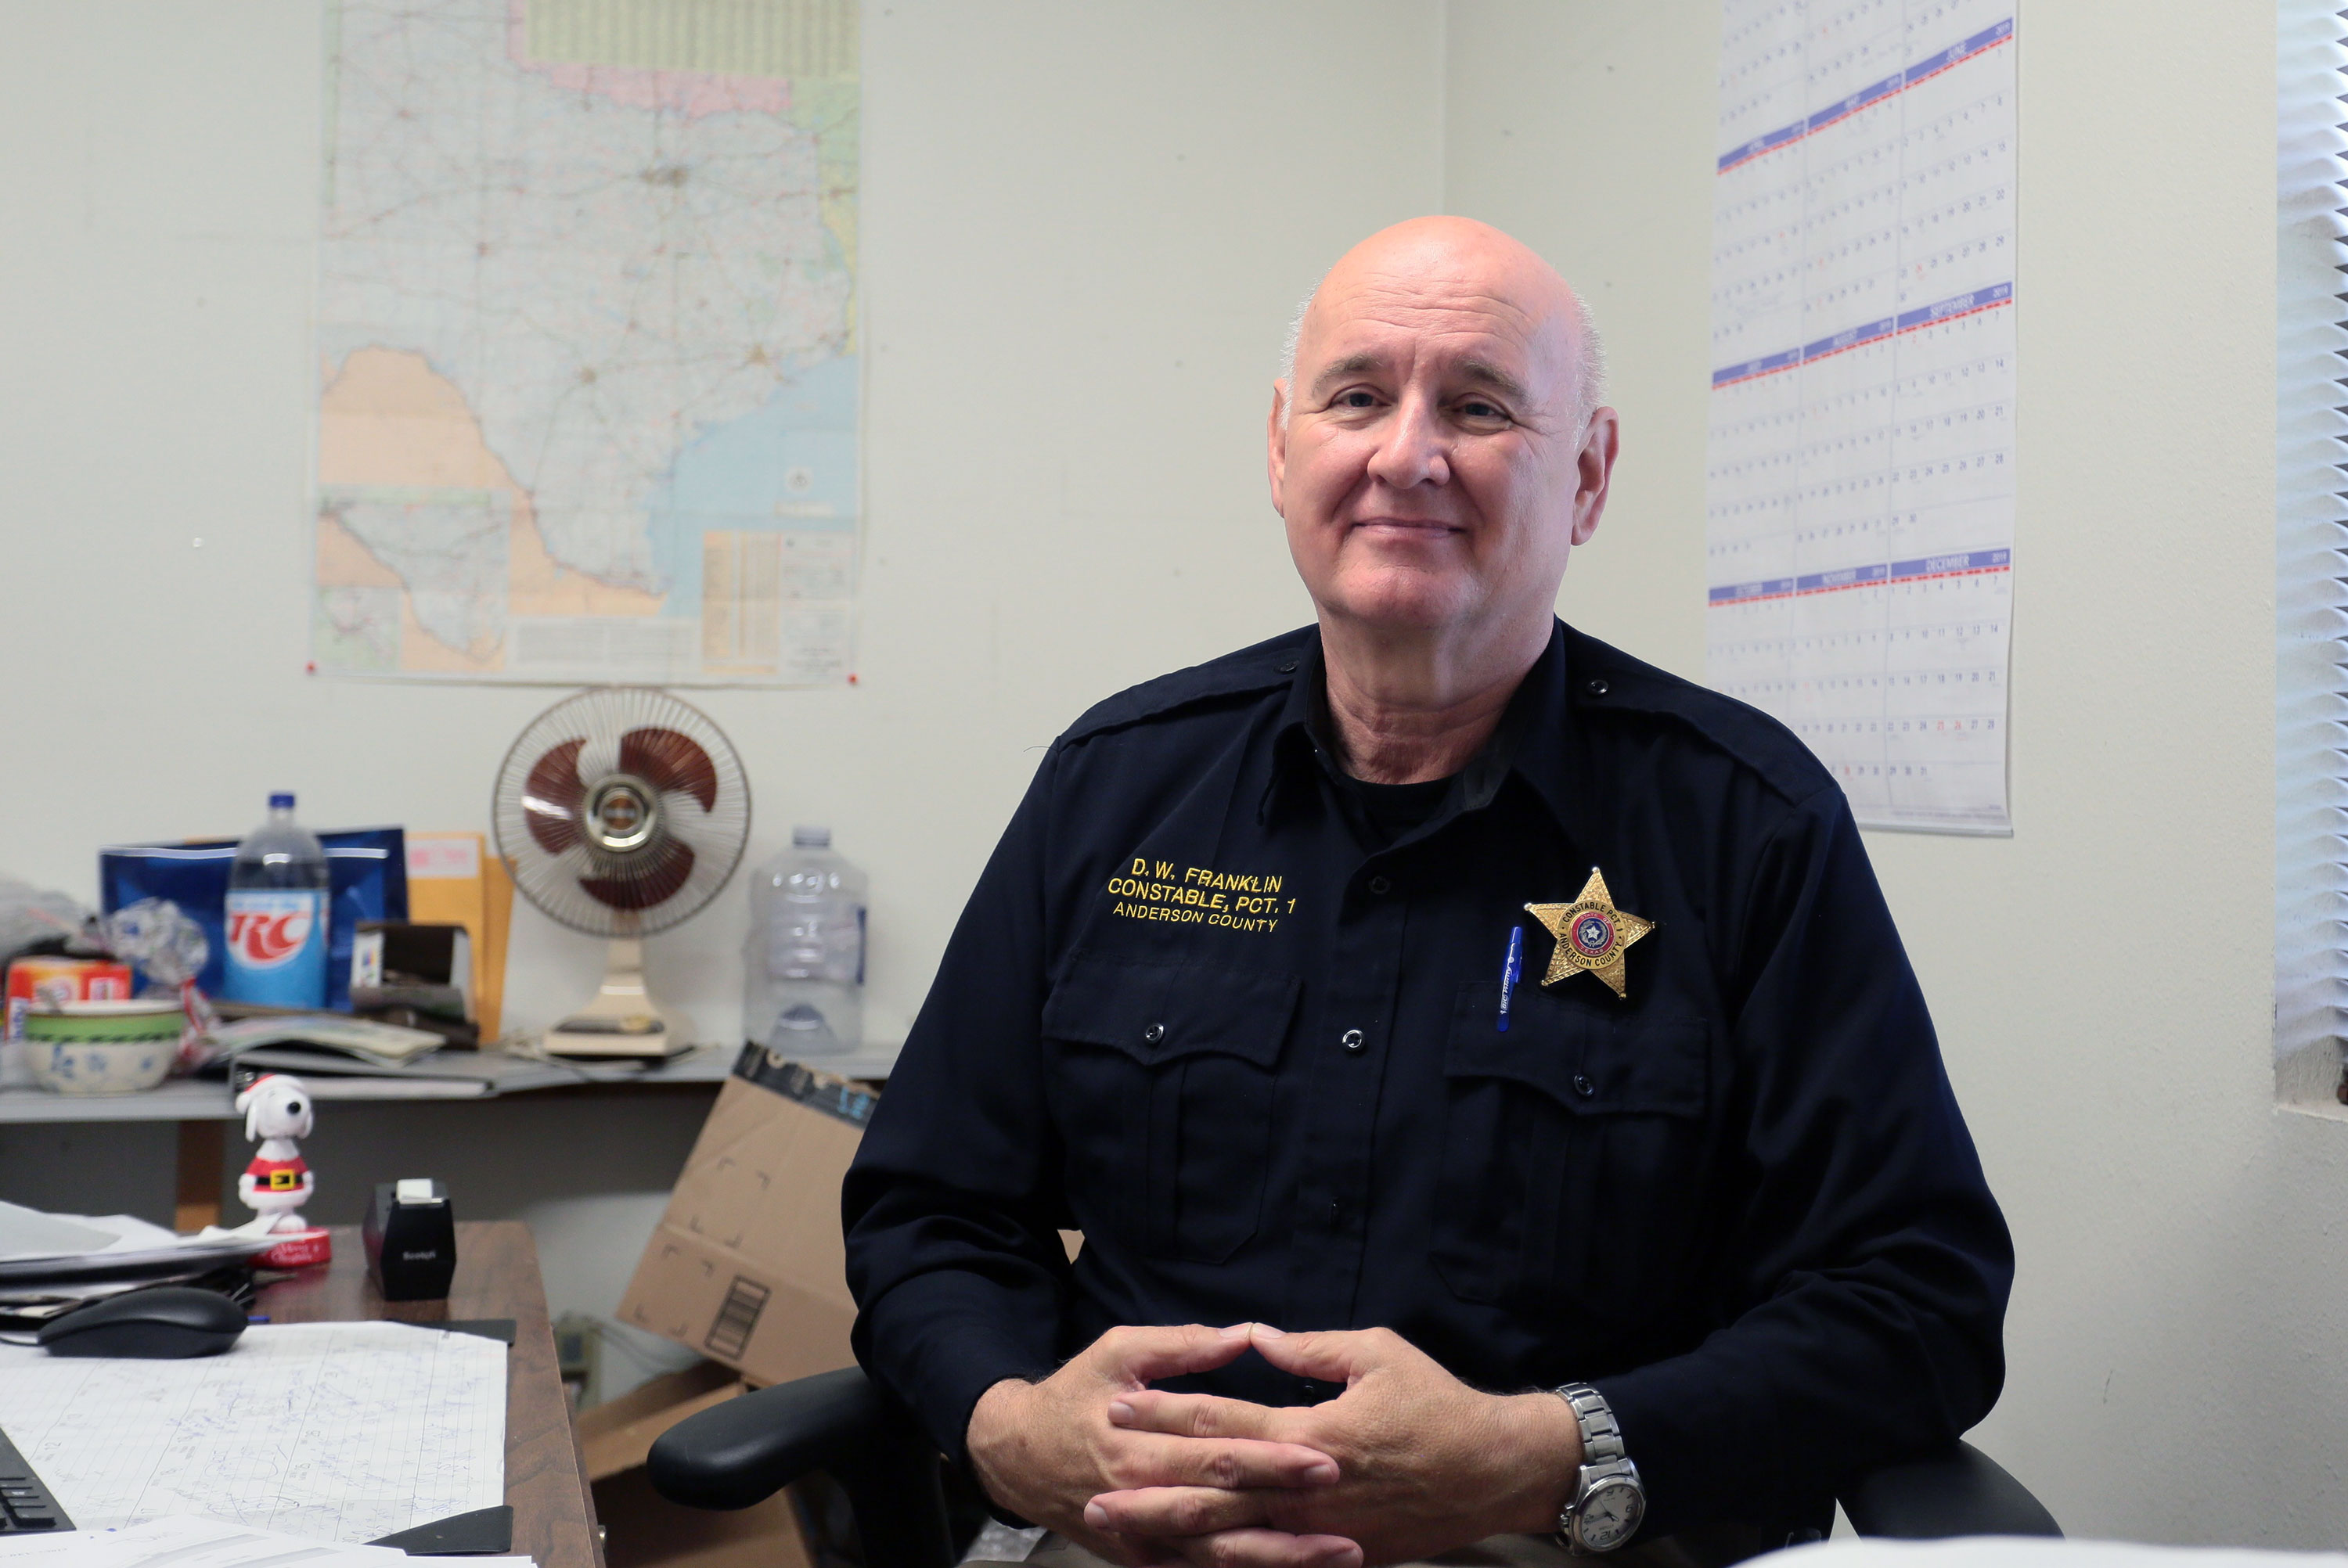 David Franklin, a local constable with. family roots in Slocum.